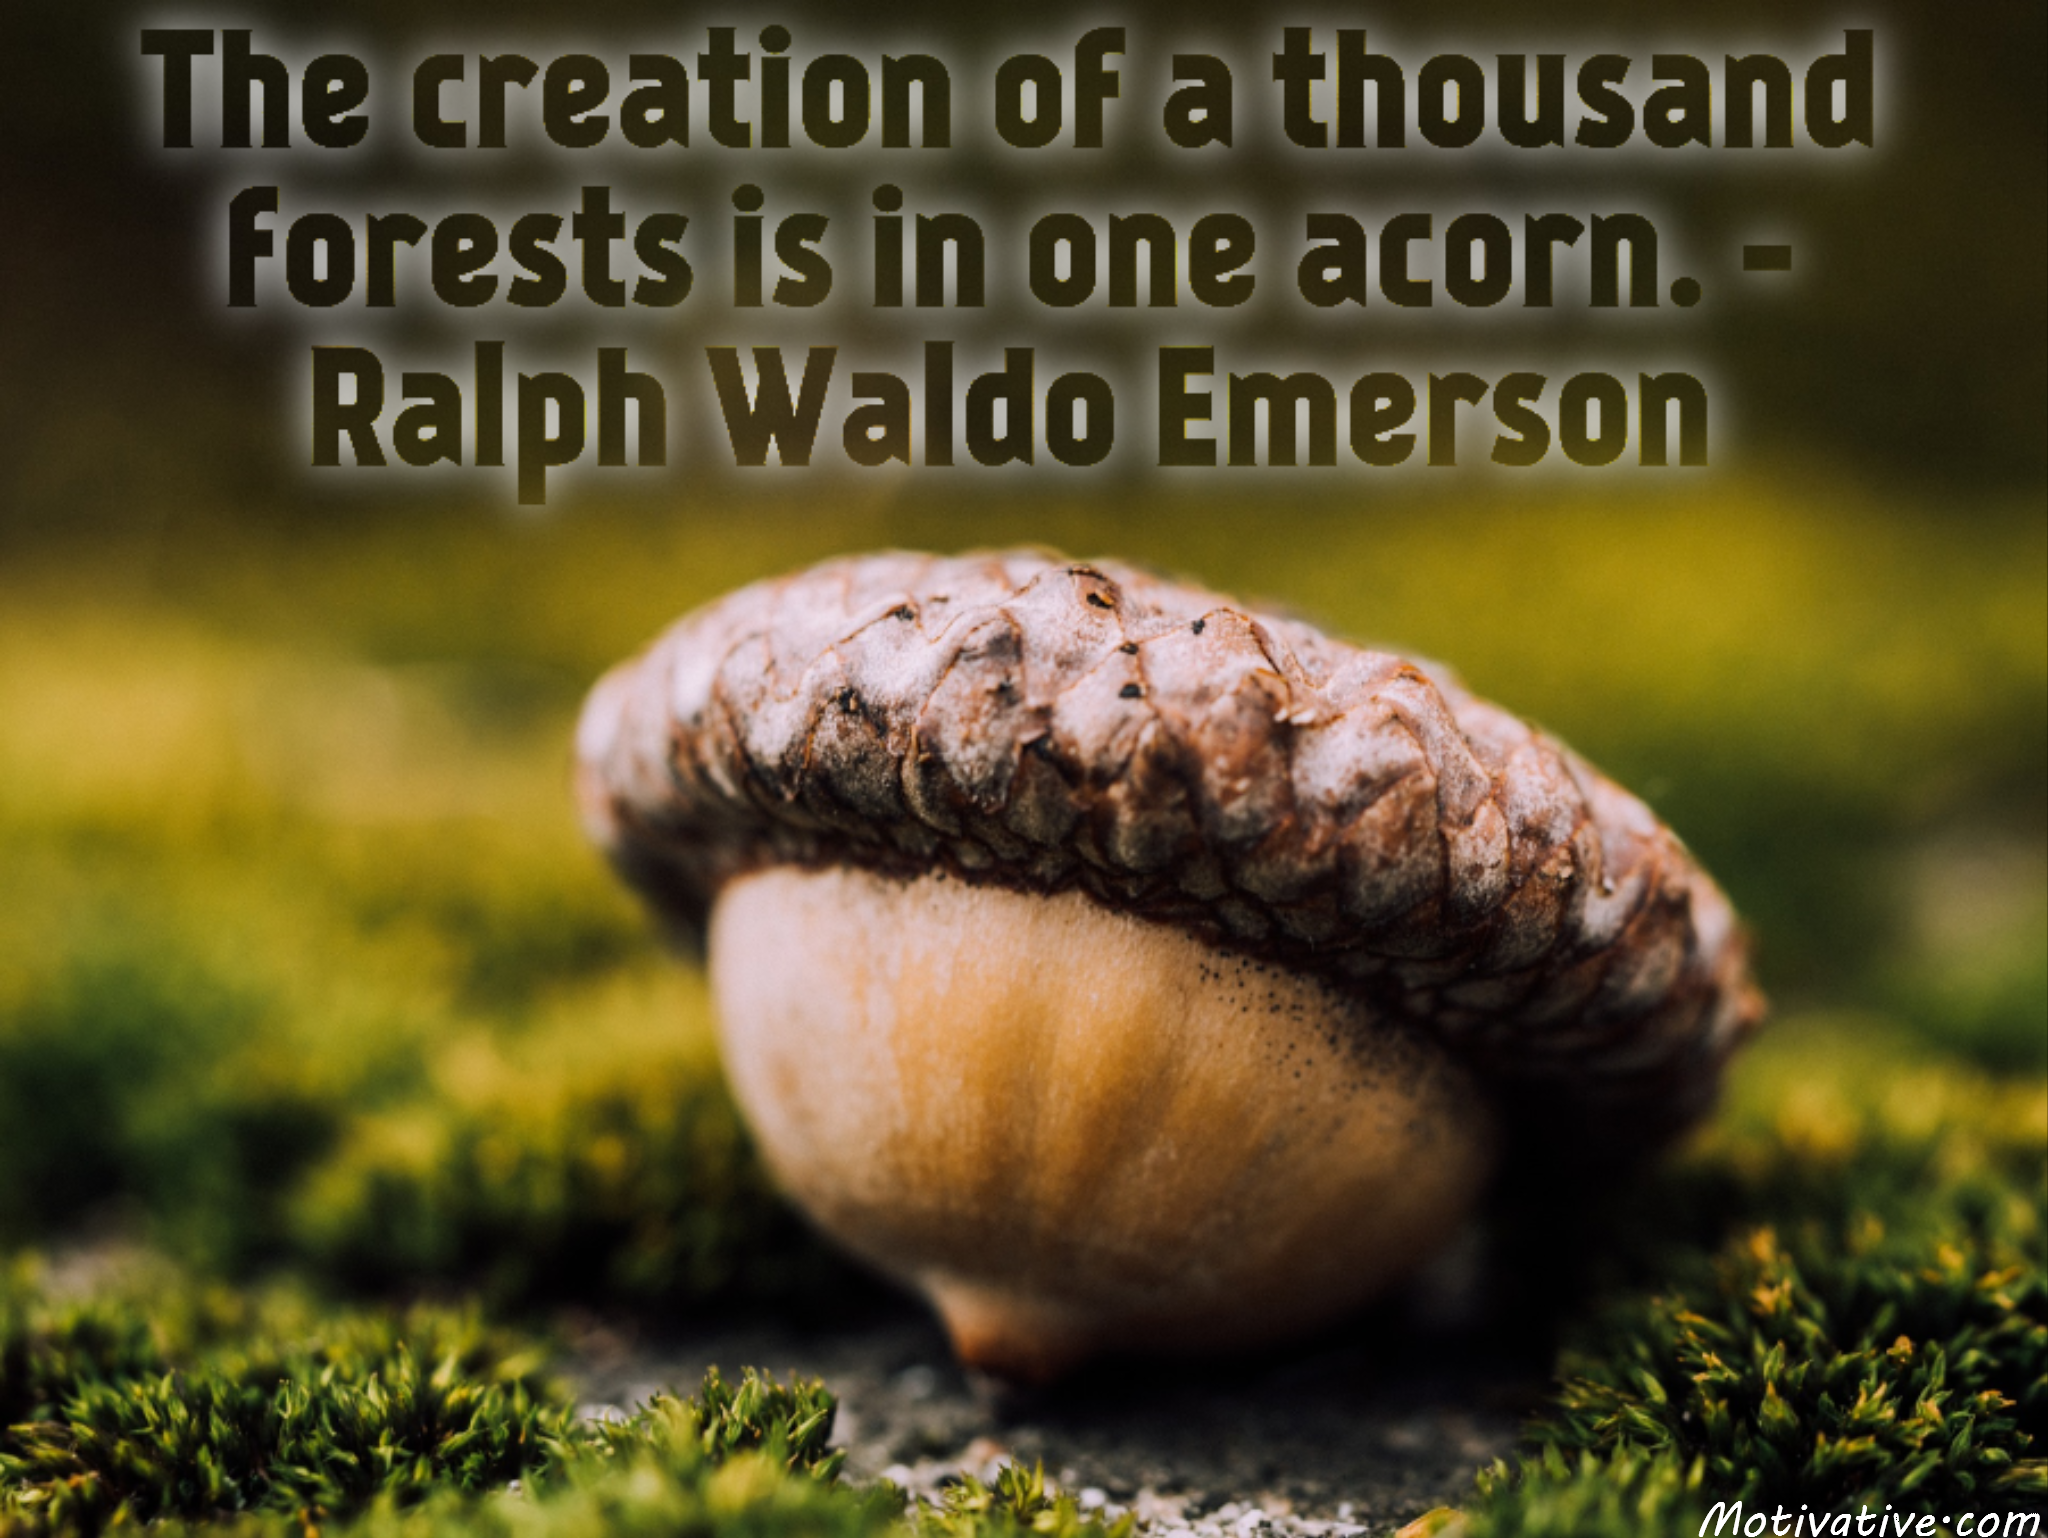 The creation of a thousand forests is in one acorn. – Ralph Waldo Emerson